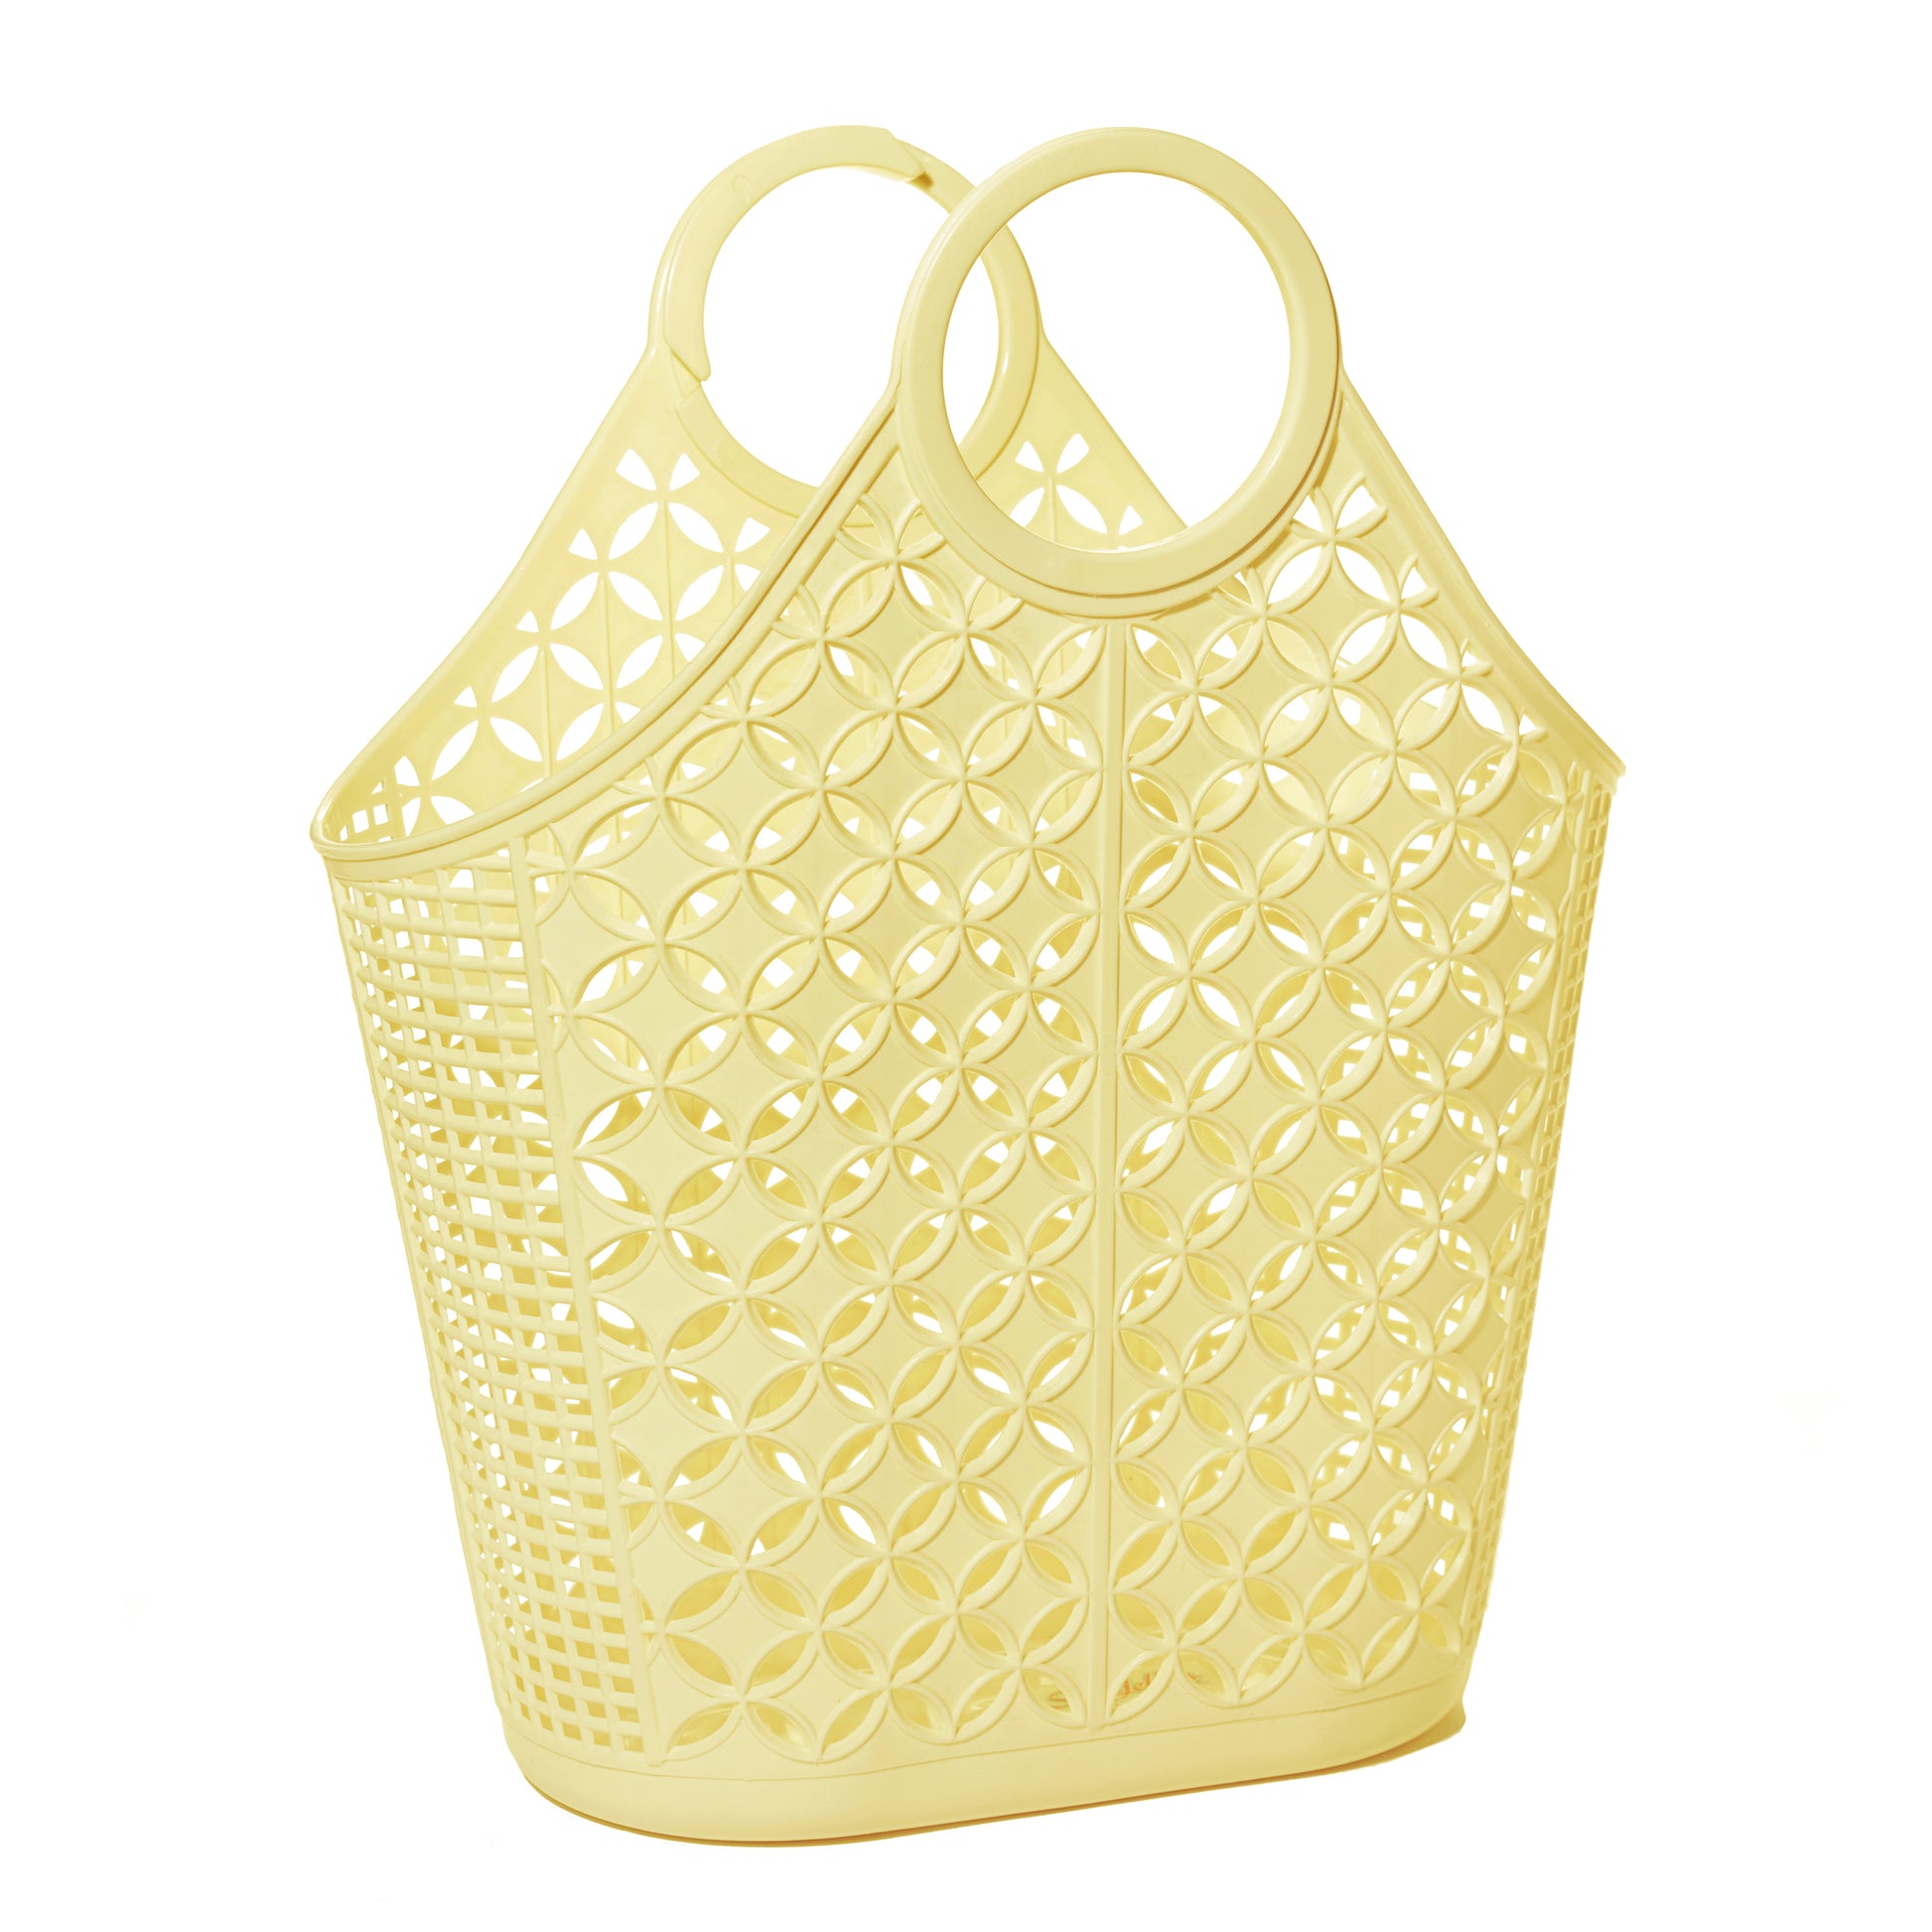 Yellow Sun Jellies Atomic Tote, Vintage style market style tote perfect for the Beach or the Shops